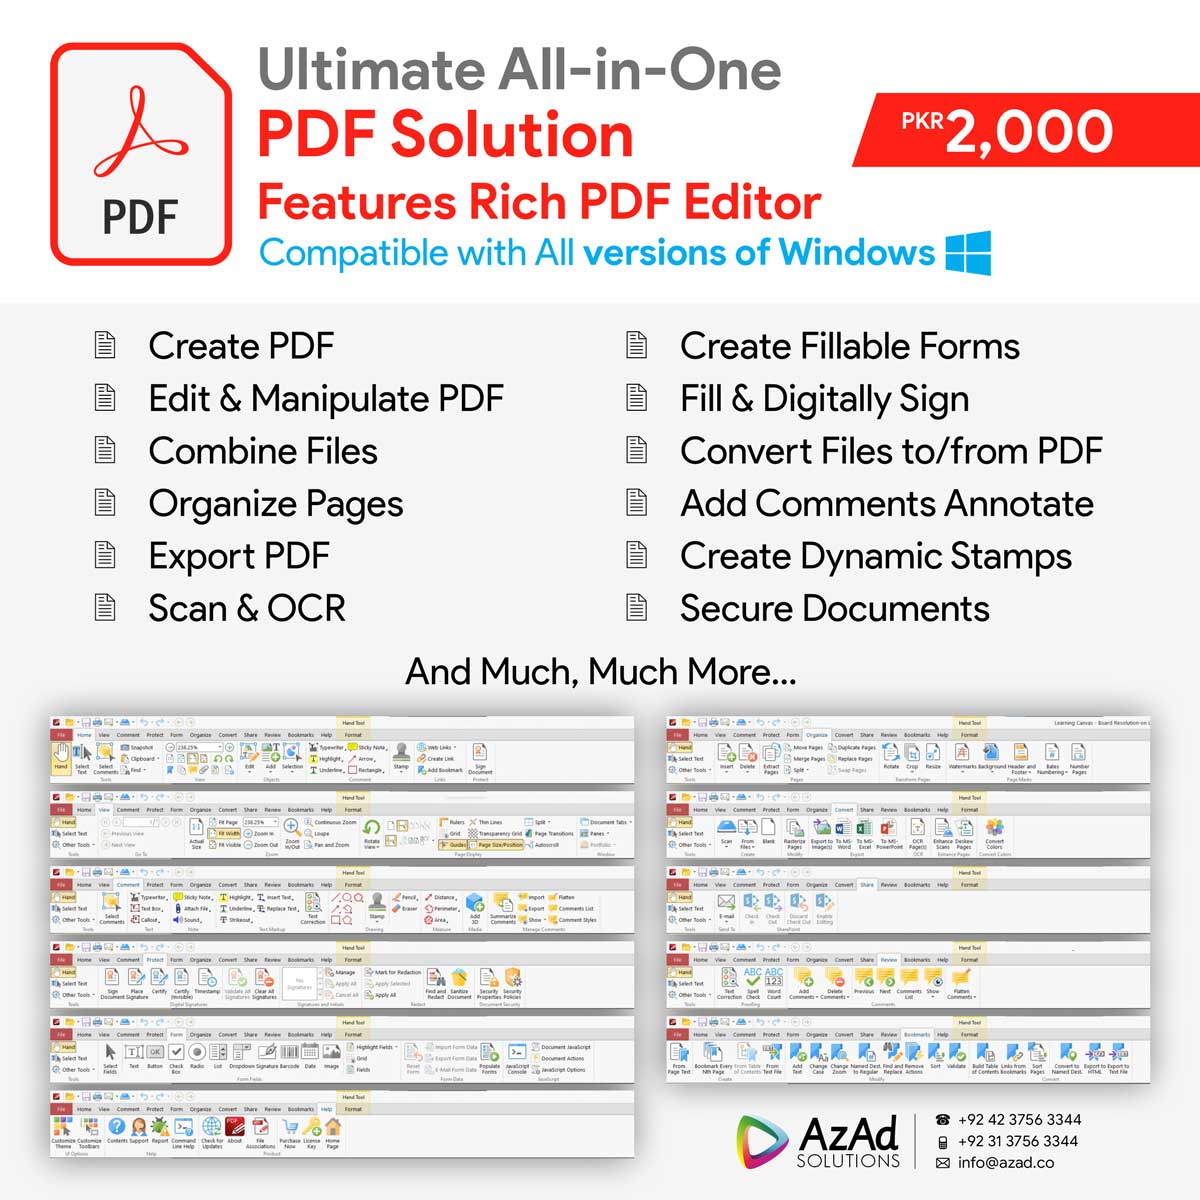 Ultimate All-in-One PDF Solution